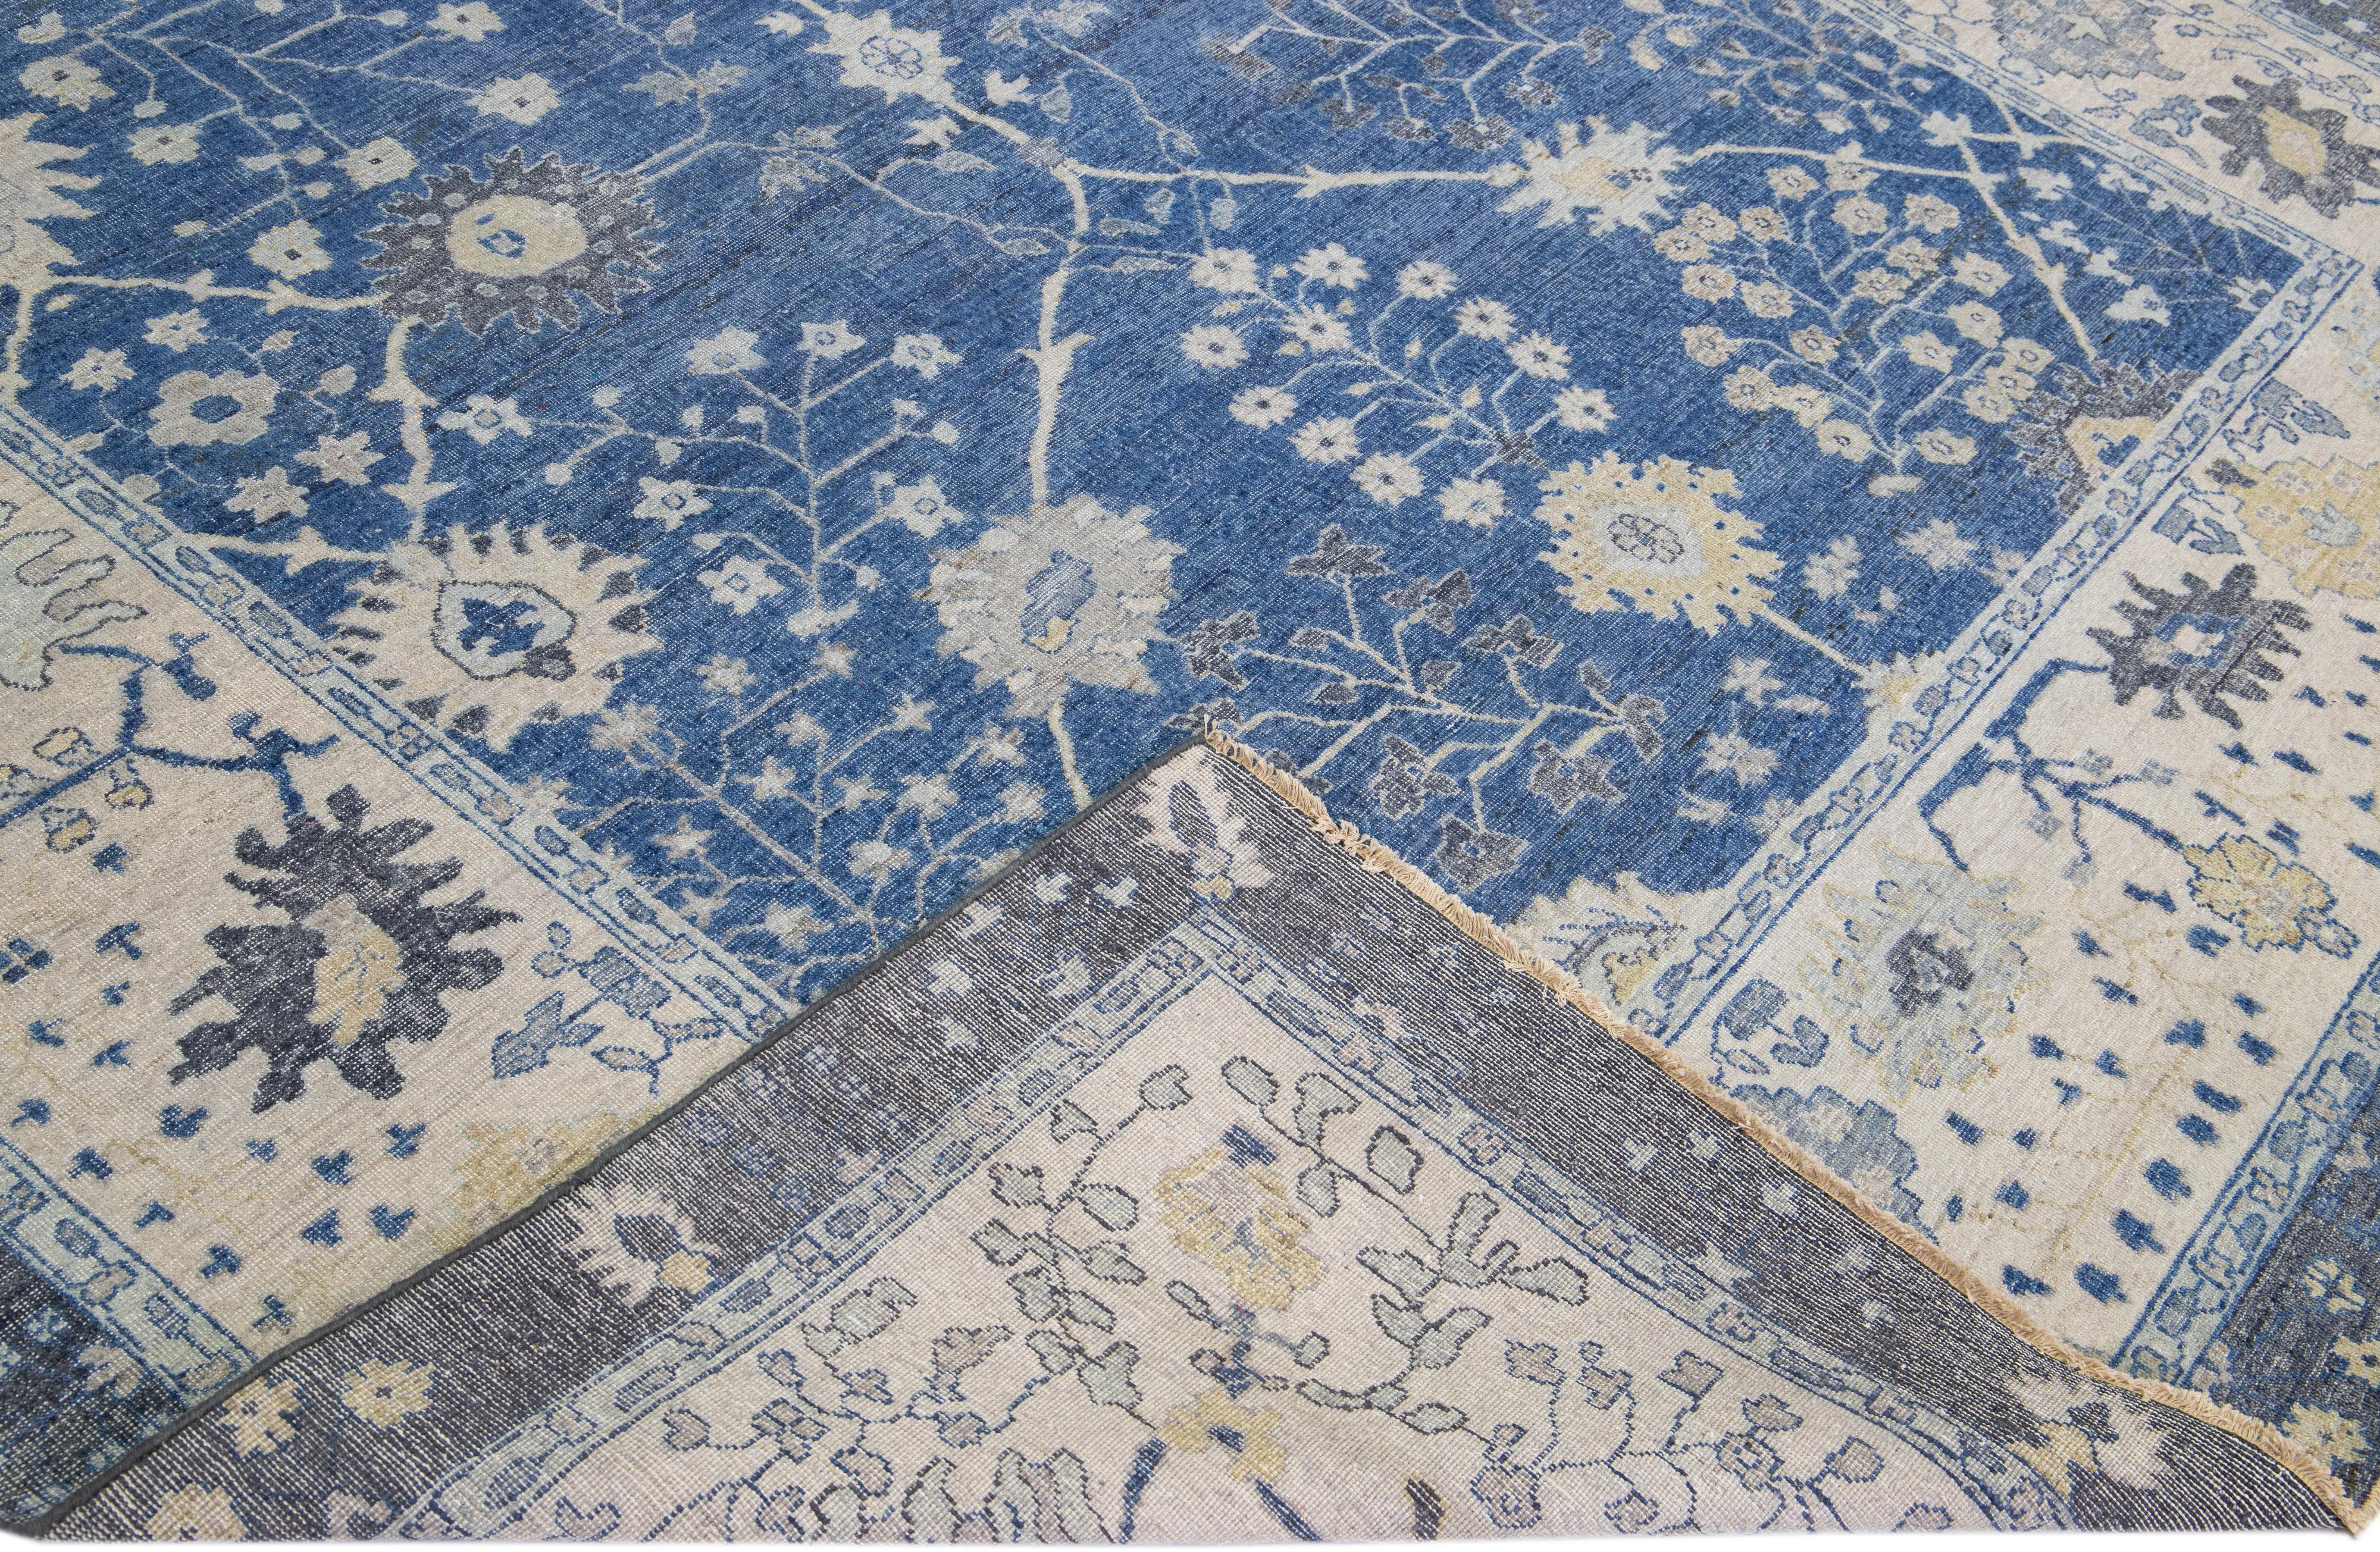 Apadana's Artisan line is an elegant way to inject a striking antique aesthetic into a space. This line of rugs is decidedly unique and reimagines what an antique rug look can be. Every single piece from our Artisan line is painstakingly woven by